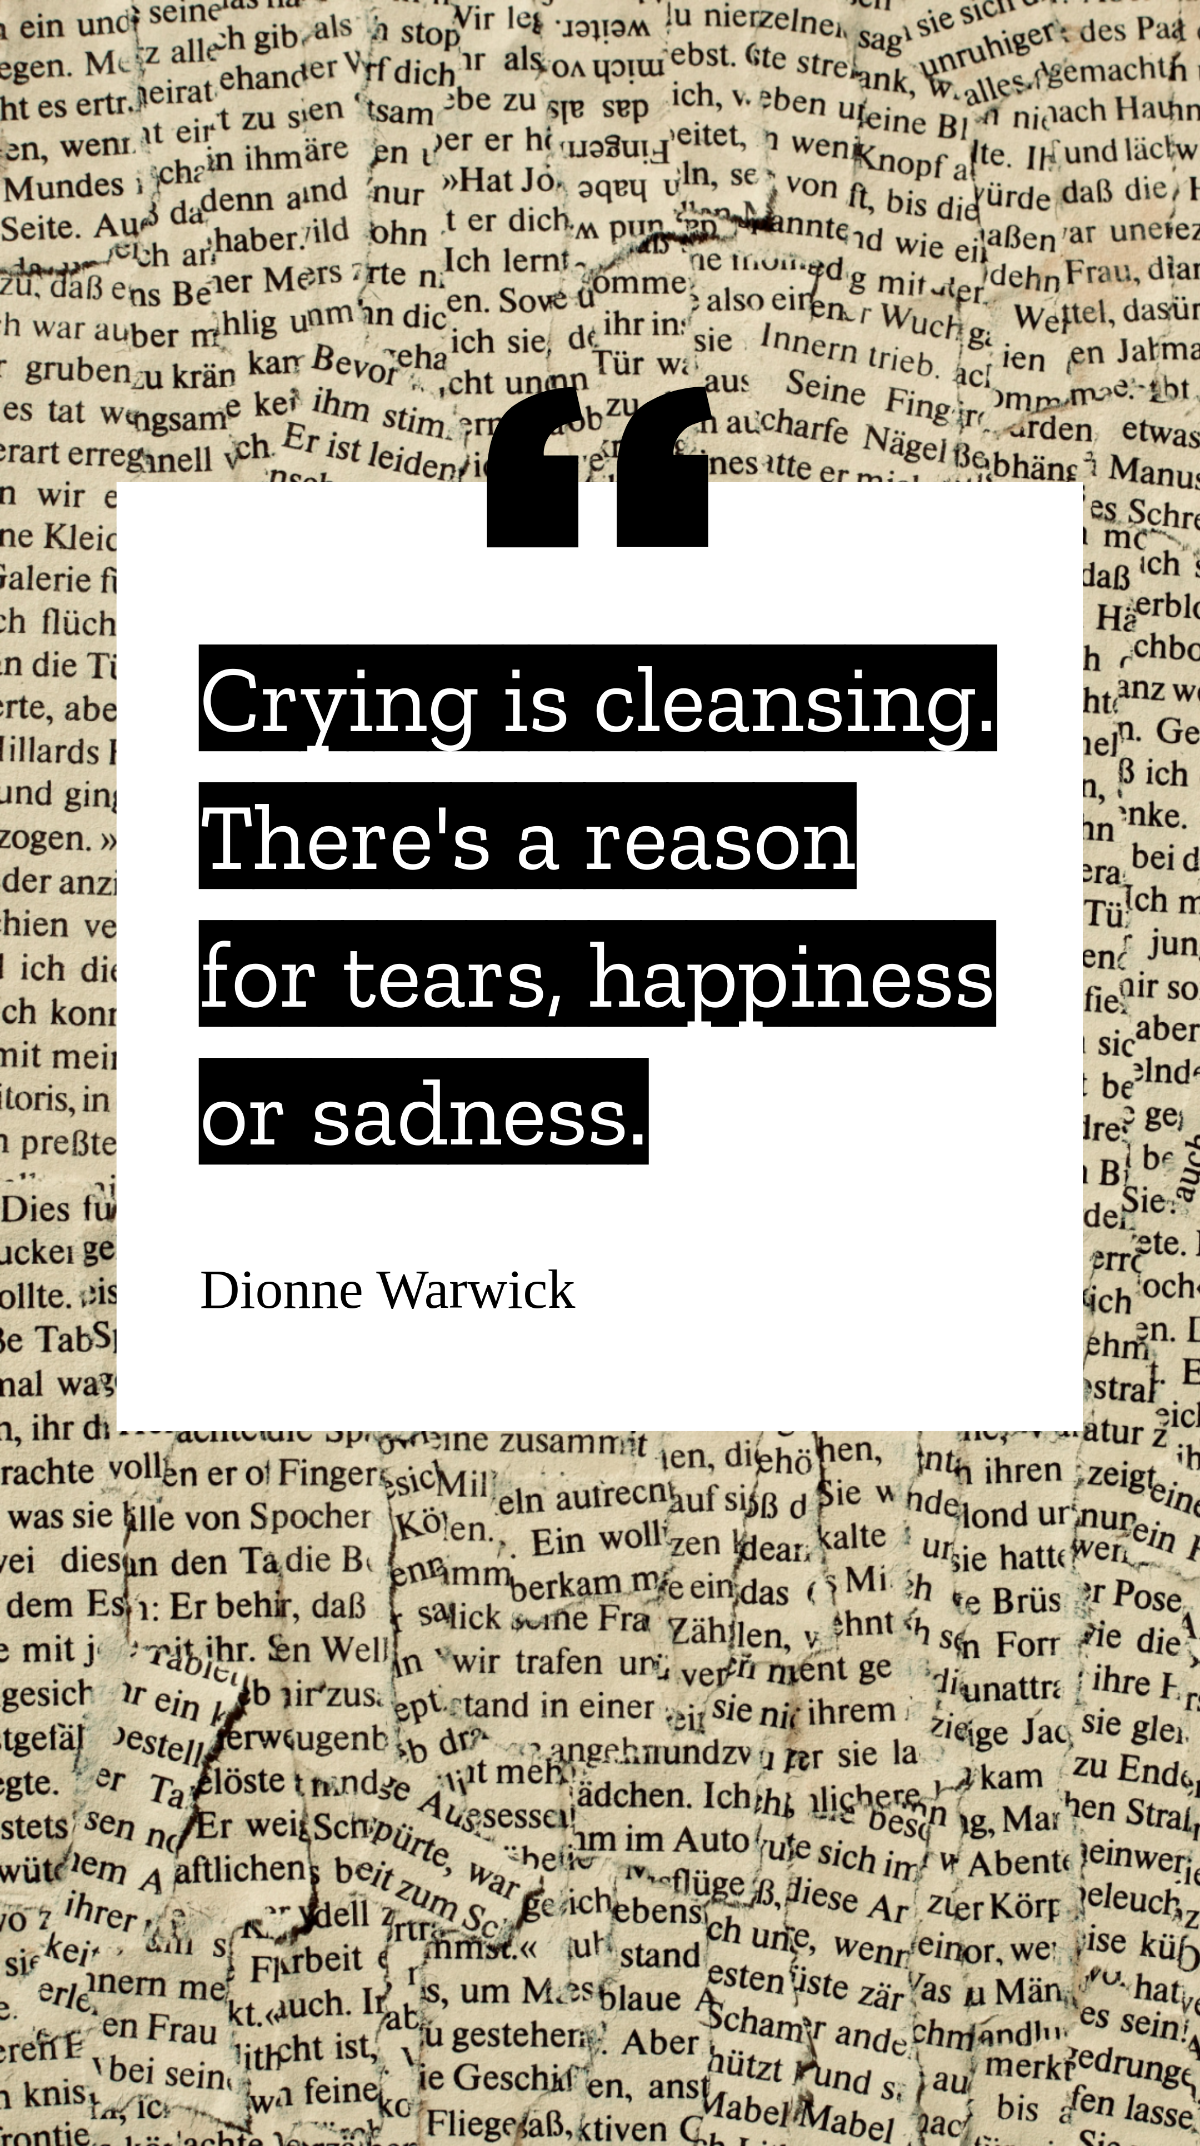 Dionne Warwick - Crying is cleansing. There's a reason for tears, happiness or sadness. Template